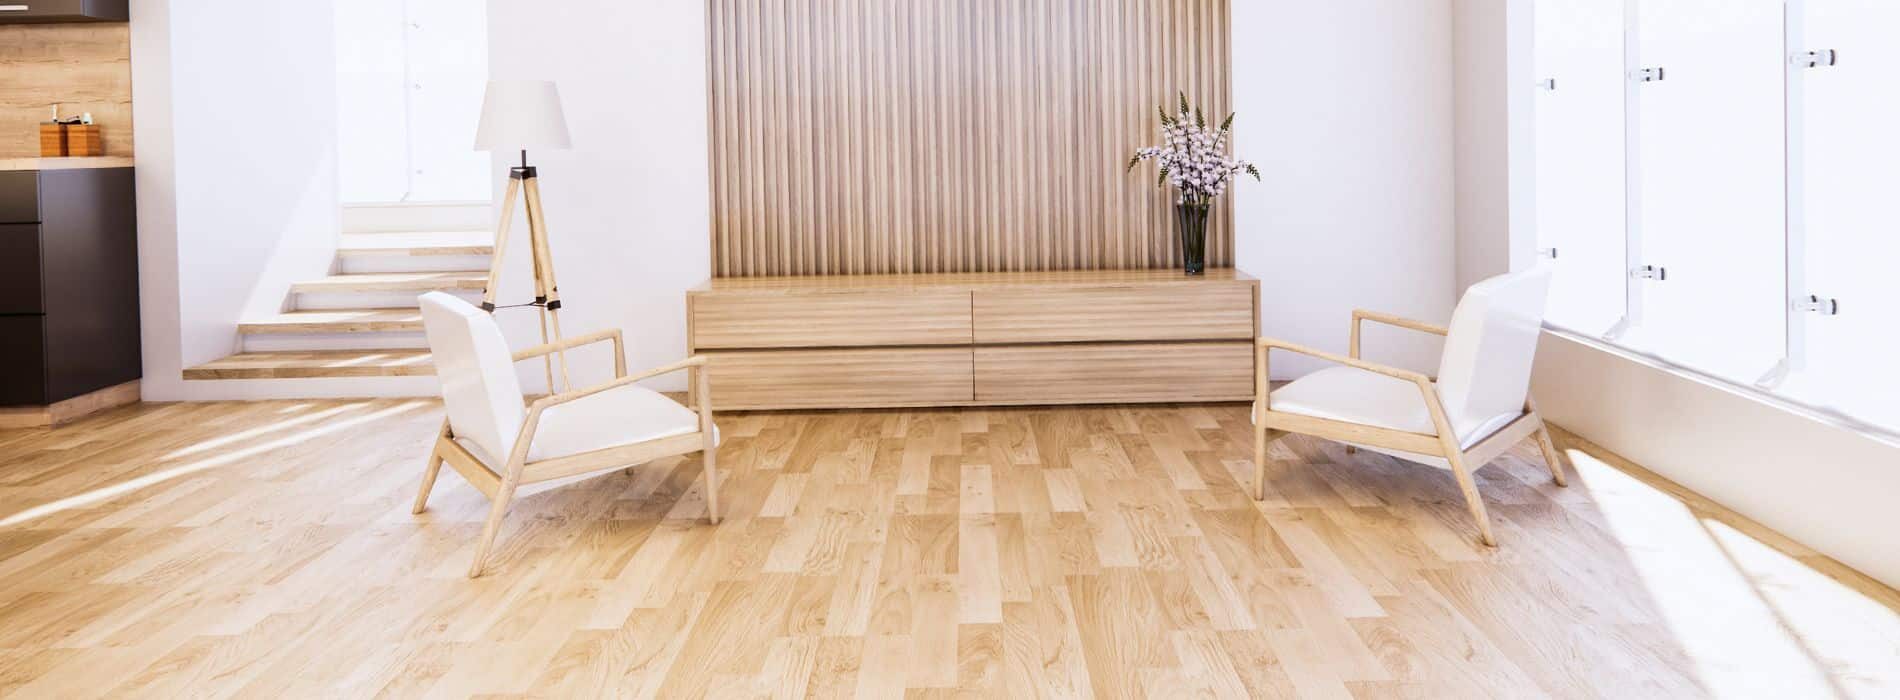 Stunning 6-year-old hardwood parquet floor expertly restored in Selsdon, CR2. Bona 2.5K Frost whitewashing and Traffic HD 25% sheen matte lacquer were applied by Mr Sander®, ensuring durability and long-lasting beauty